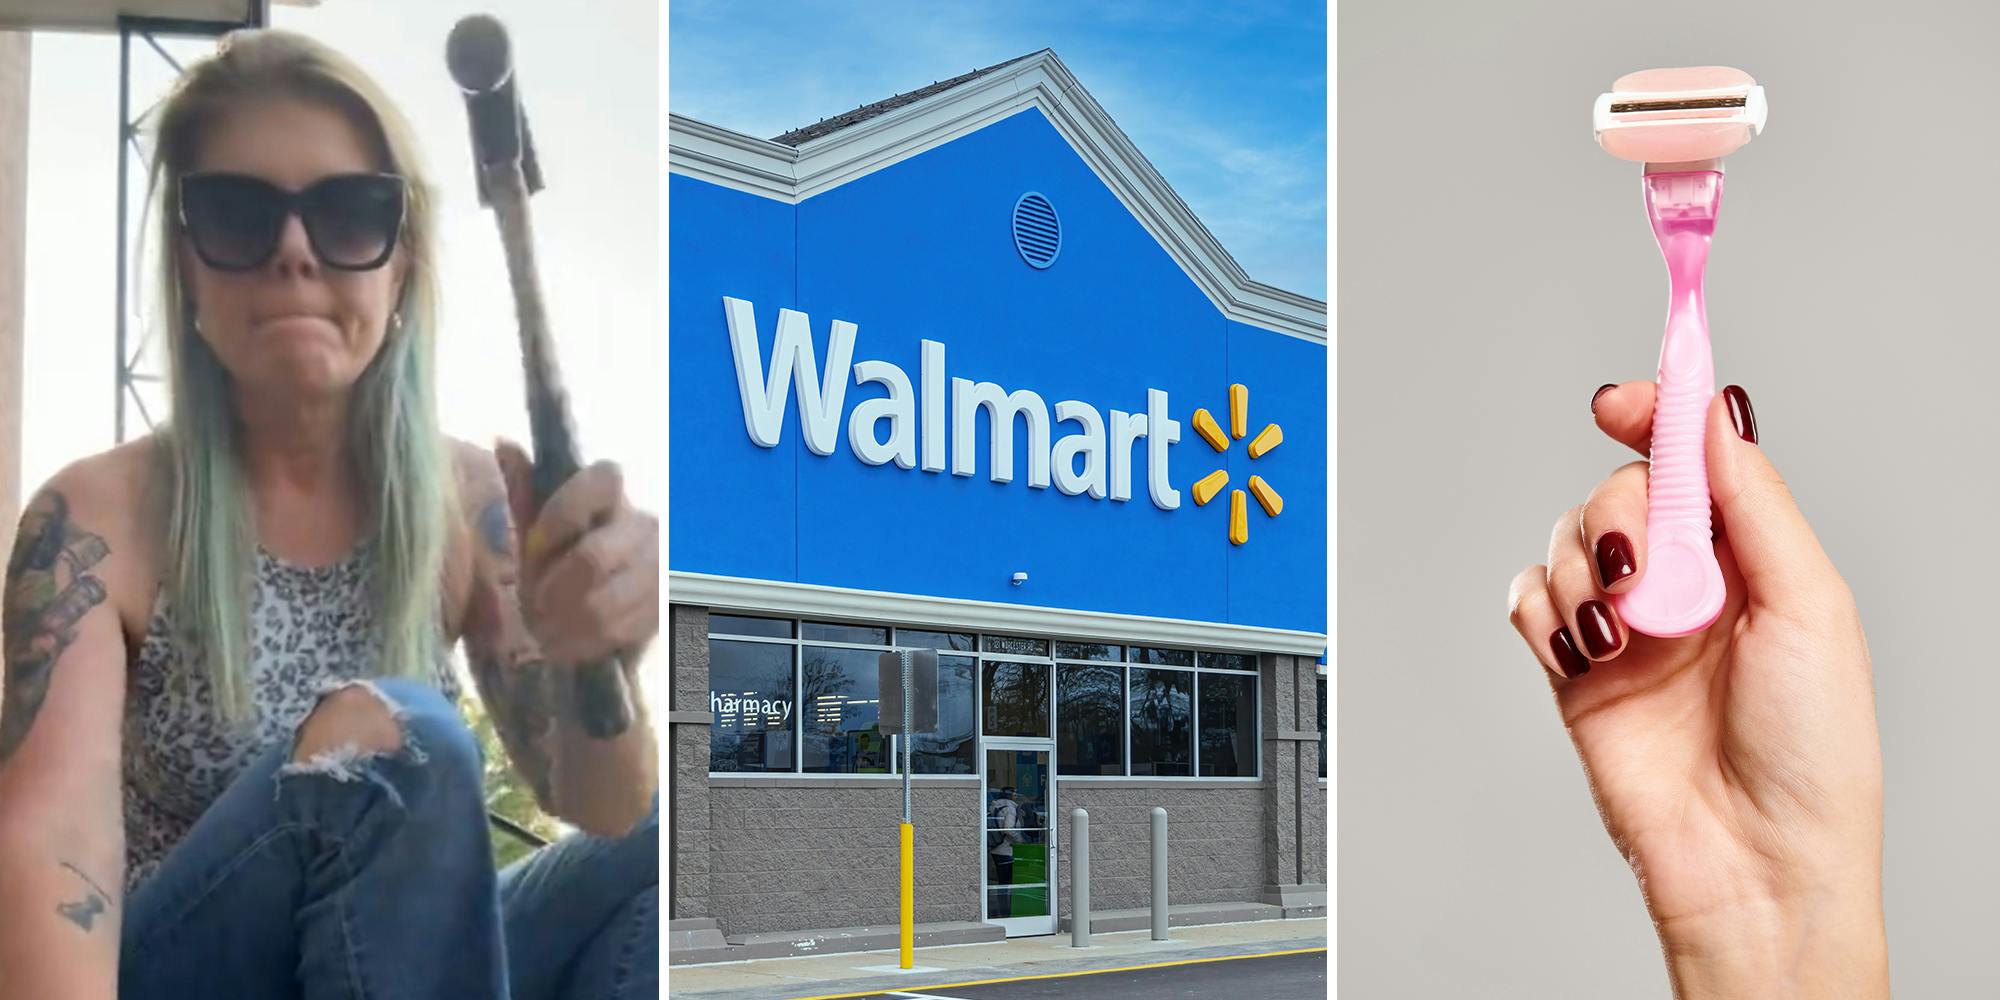 ‘Delivered my razors still in the anti-theft package’: Walmart customer has to get own package out of locked box